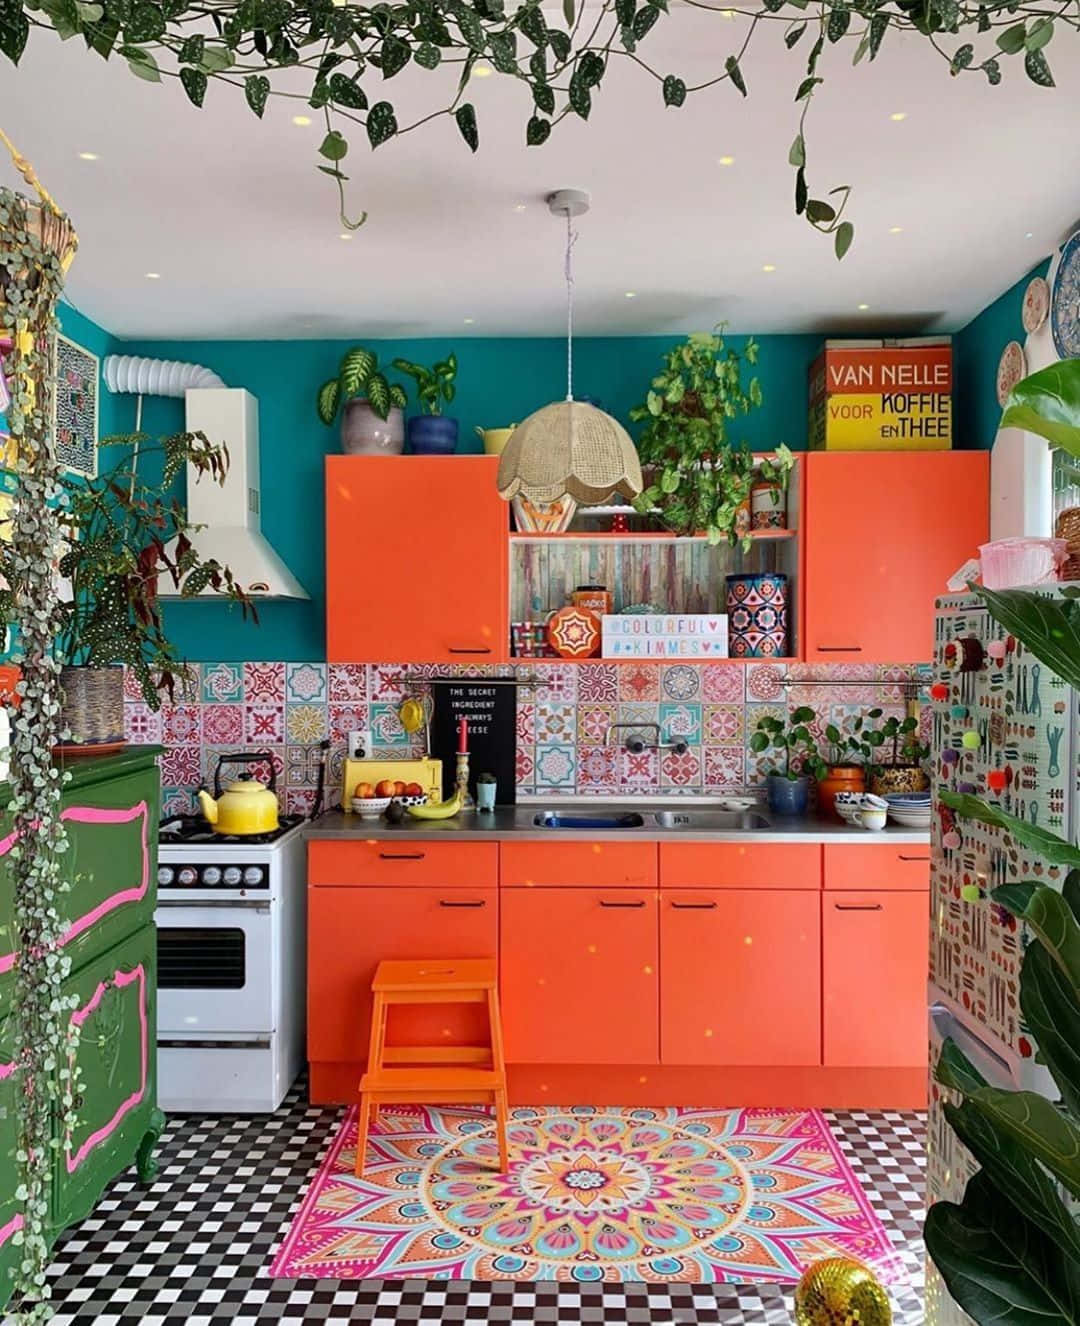 A Colorful Kitchen With Bright Orange Cabinets And A Colorful Floor